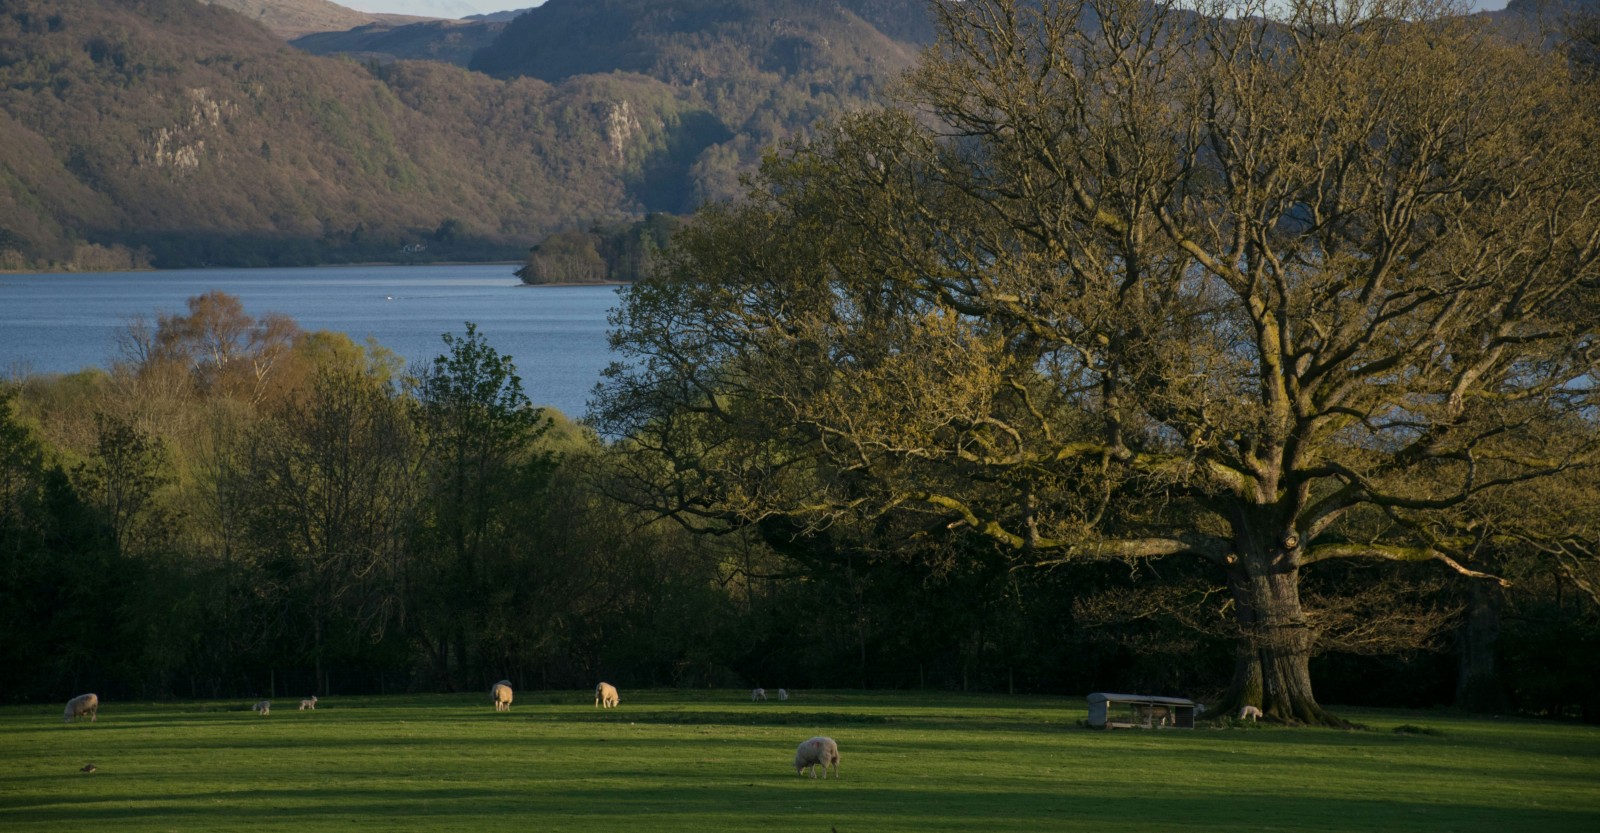 Sheep, trees, countryside, water